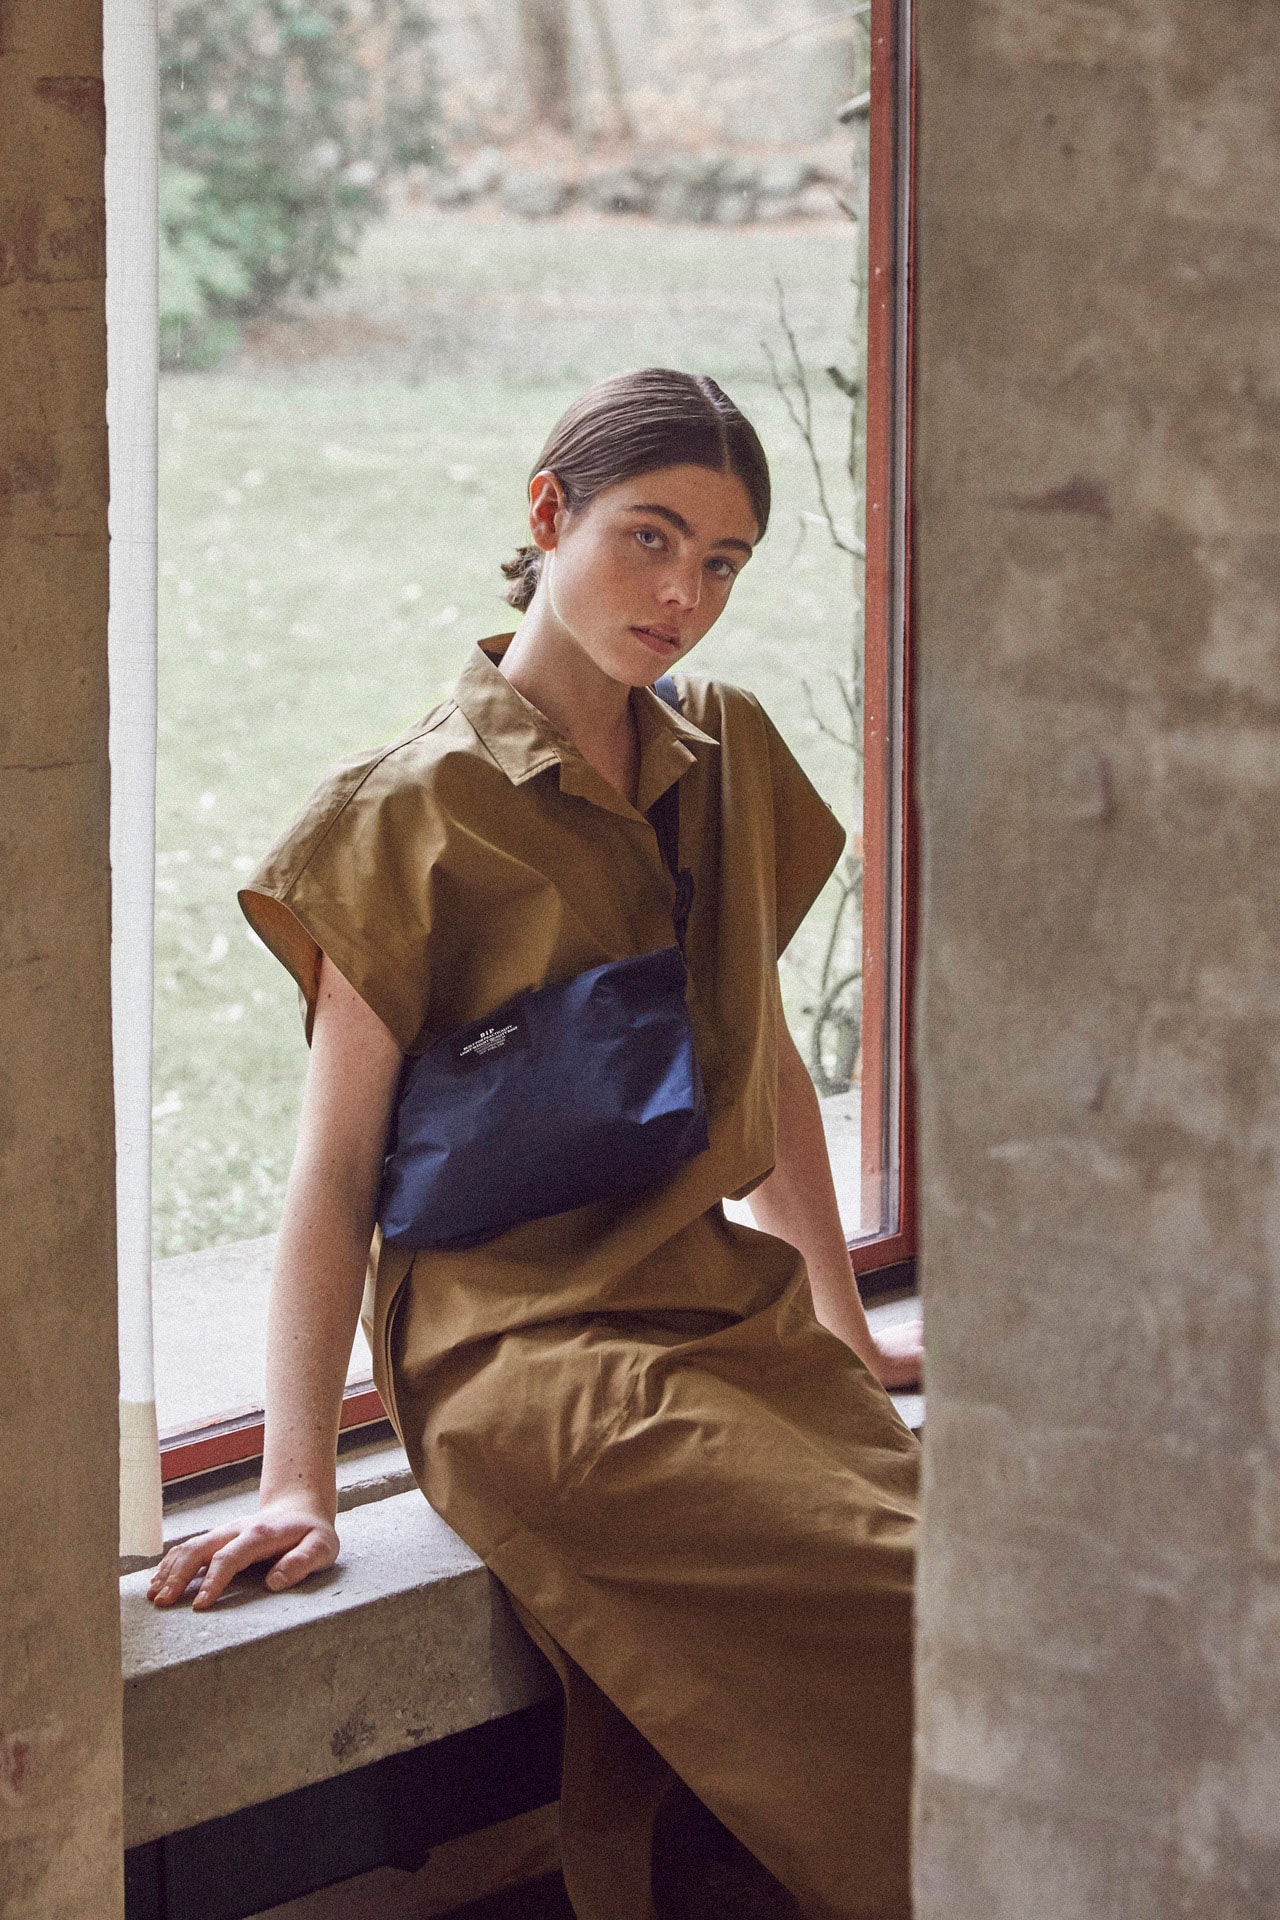 Norse Store Spring Summer 2019 Editorial Dress Brown Bag Blue